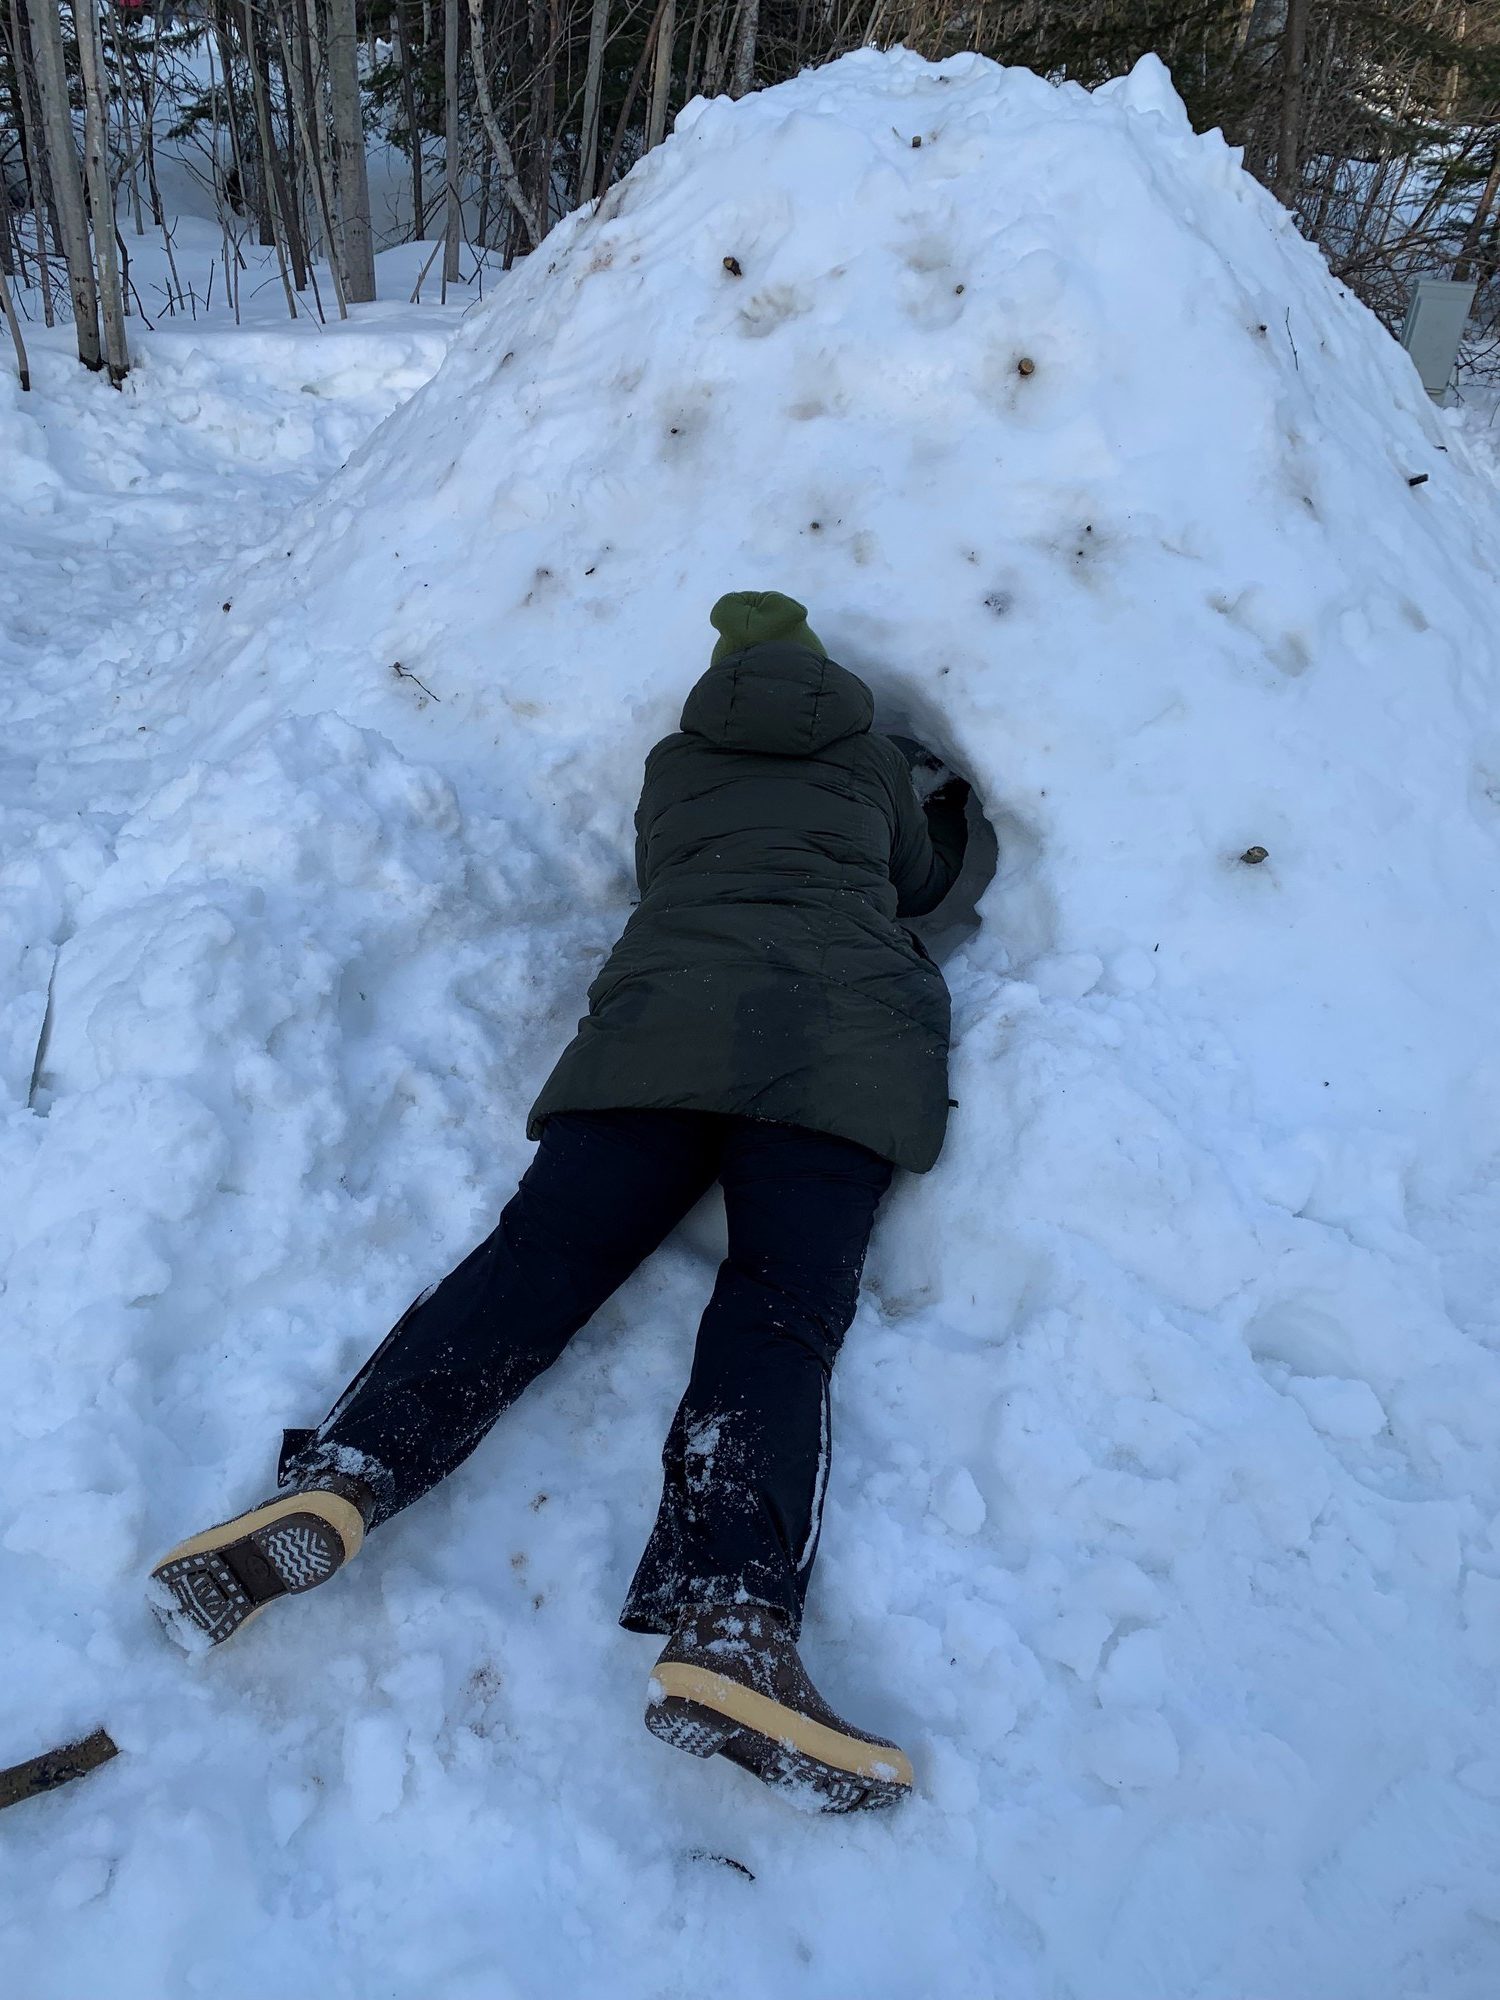 person in winter gear digging into a pile of snow.